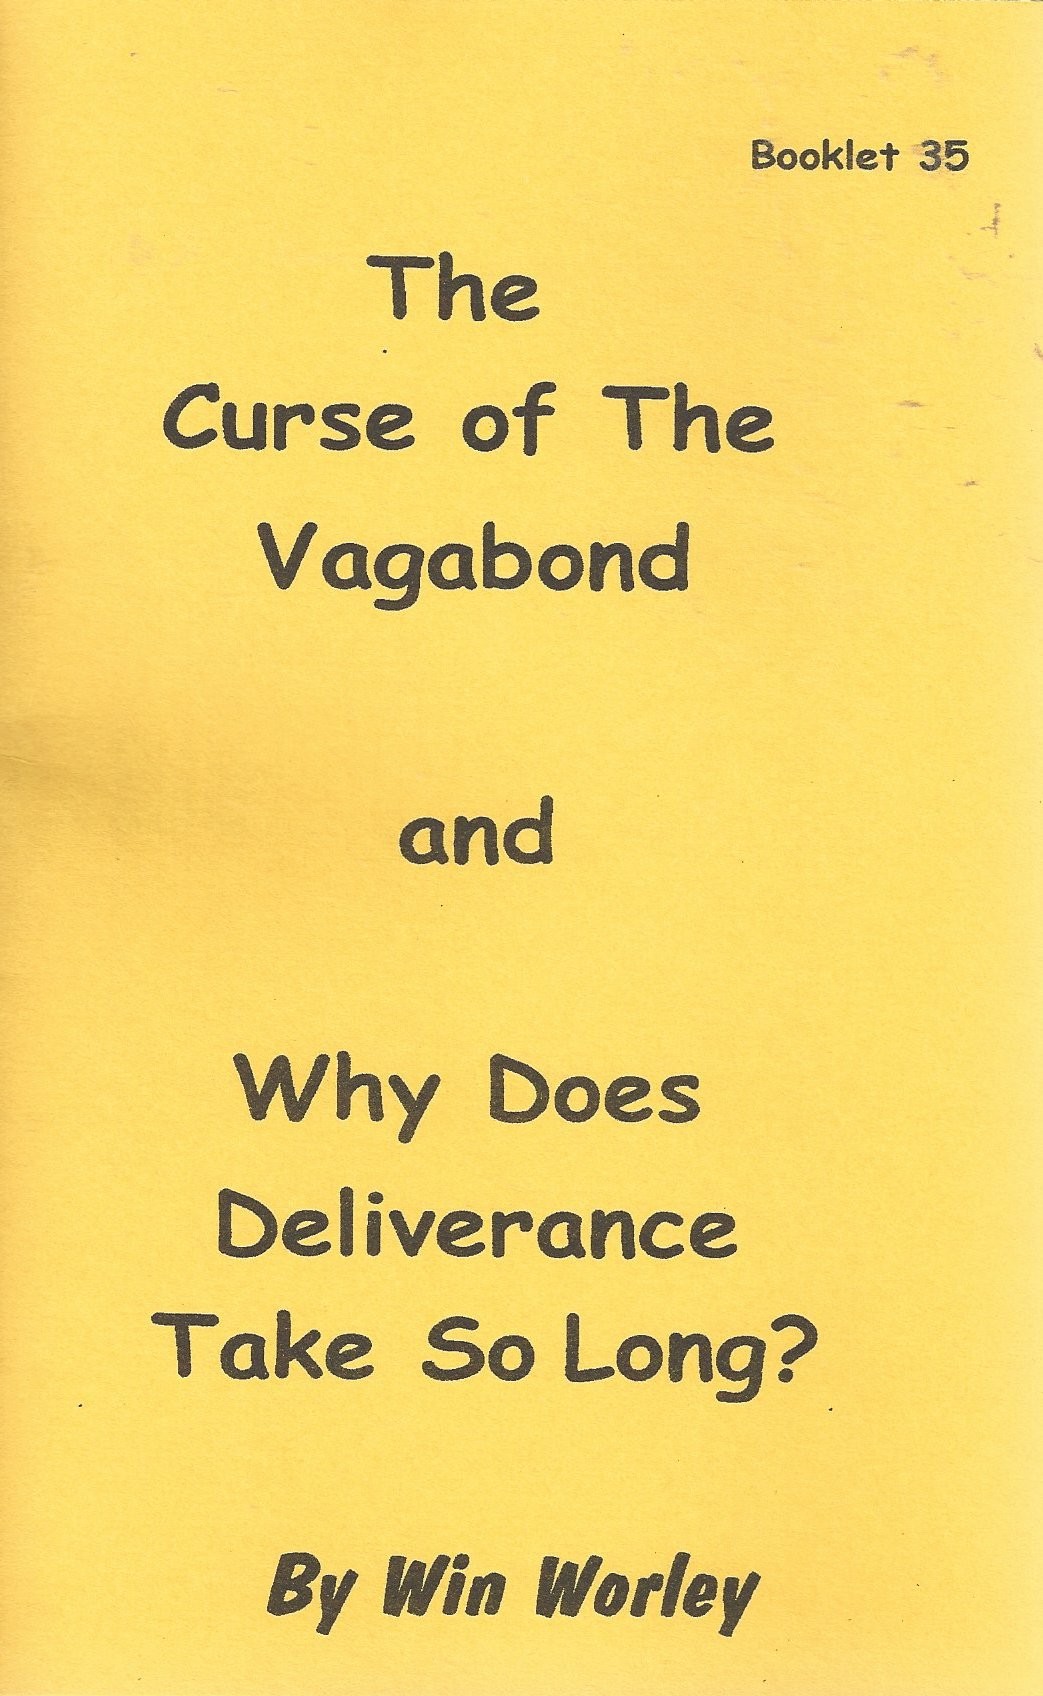 The Curse of the Vagabond front